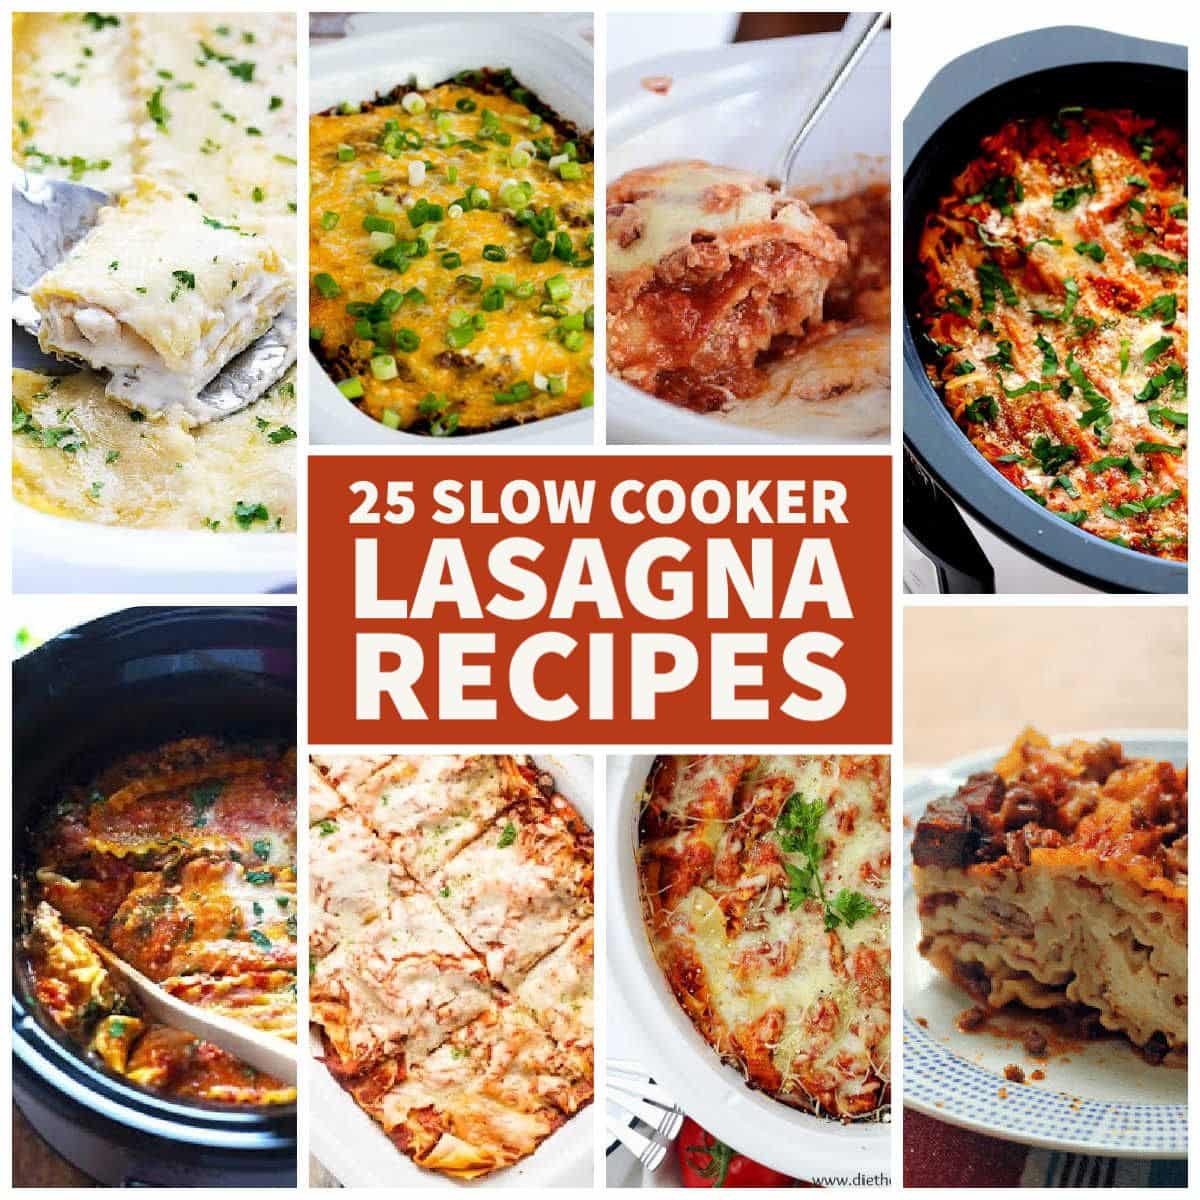 25 Slow Cooker Lasagna Recipes collage with text overlay.